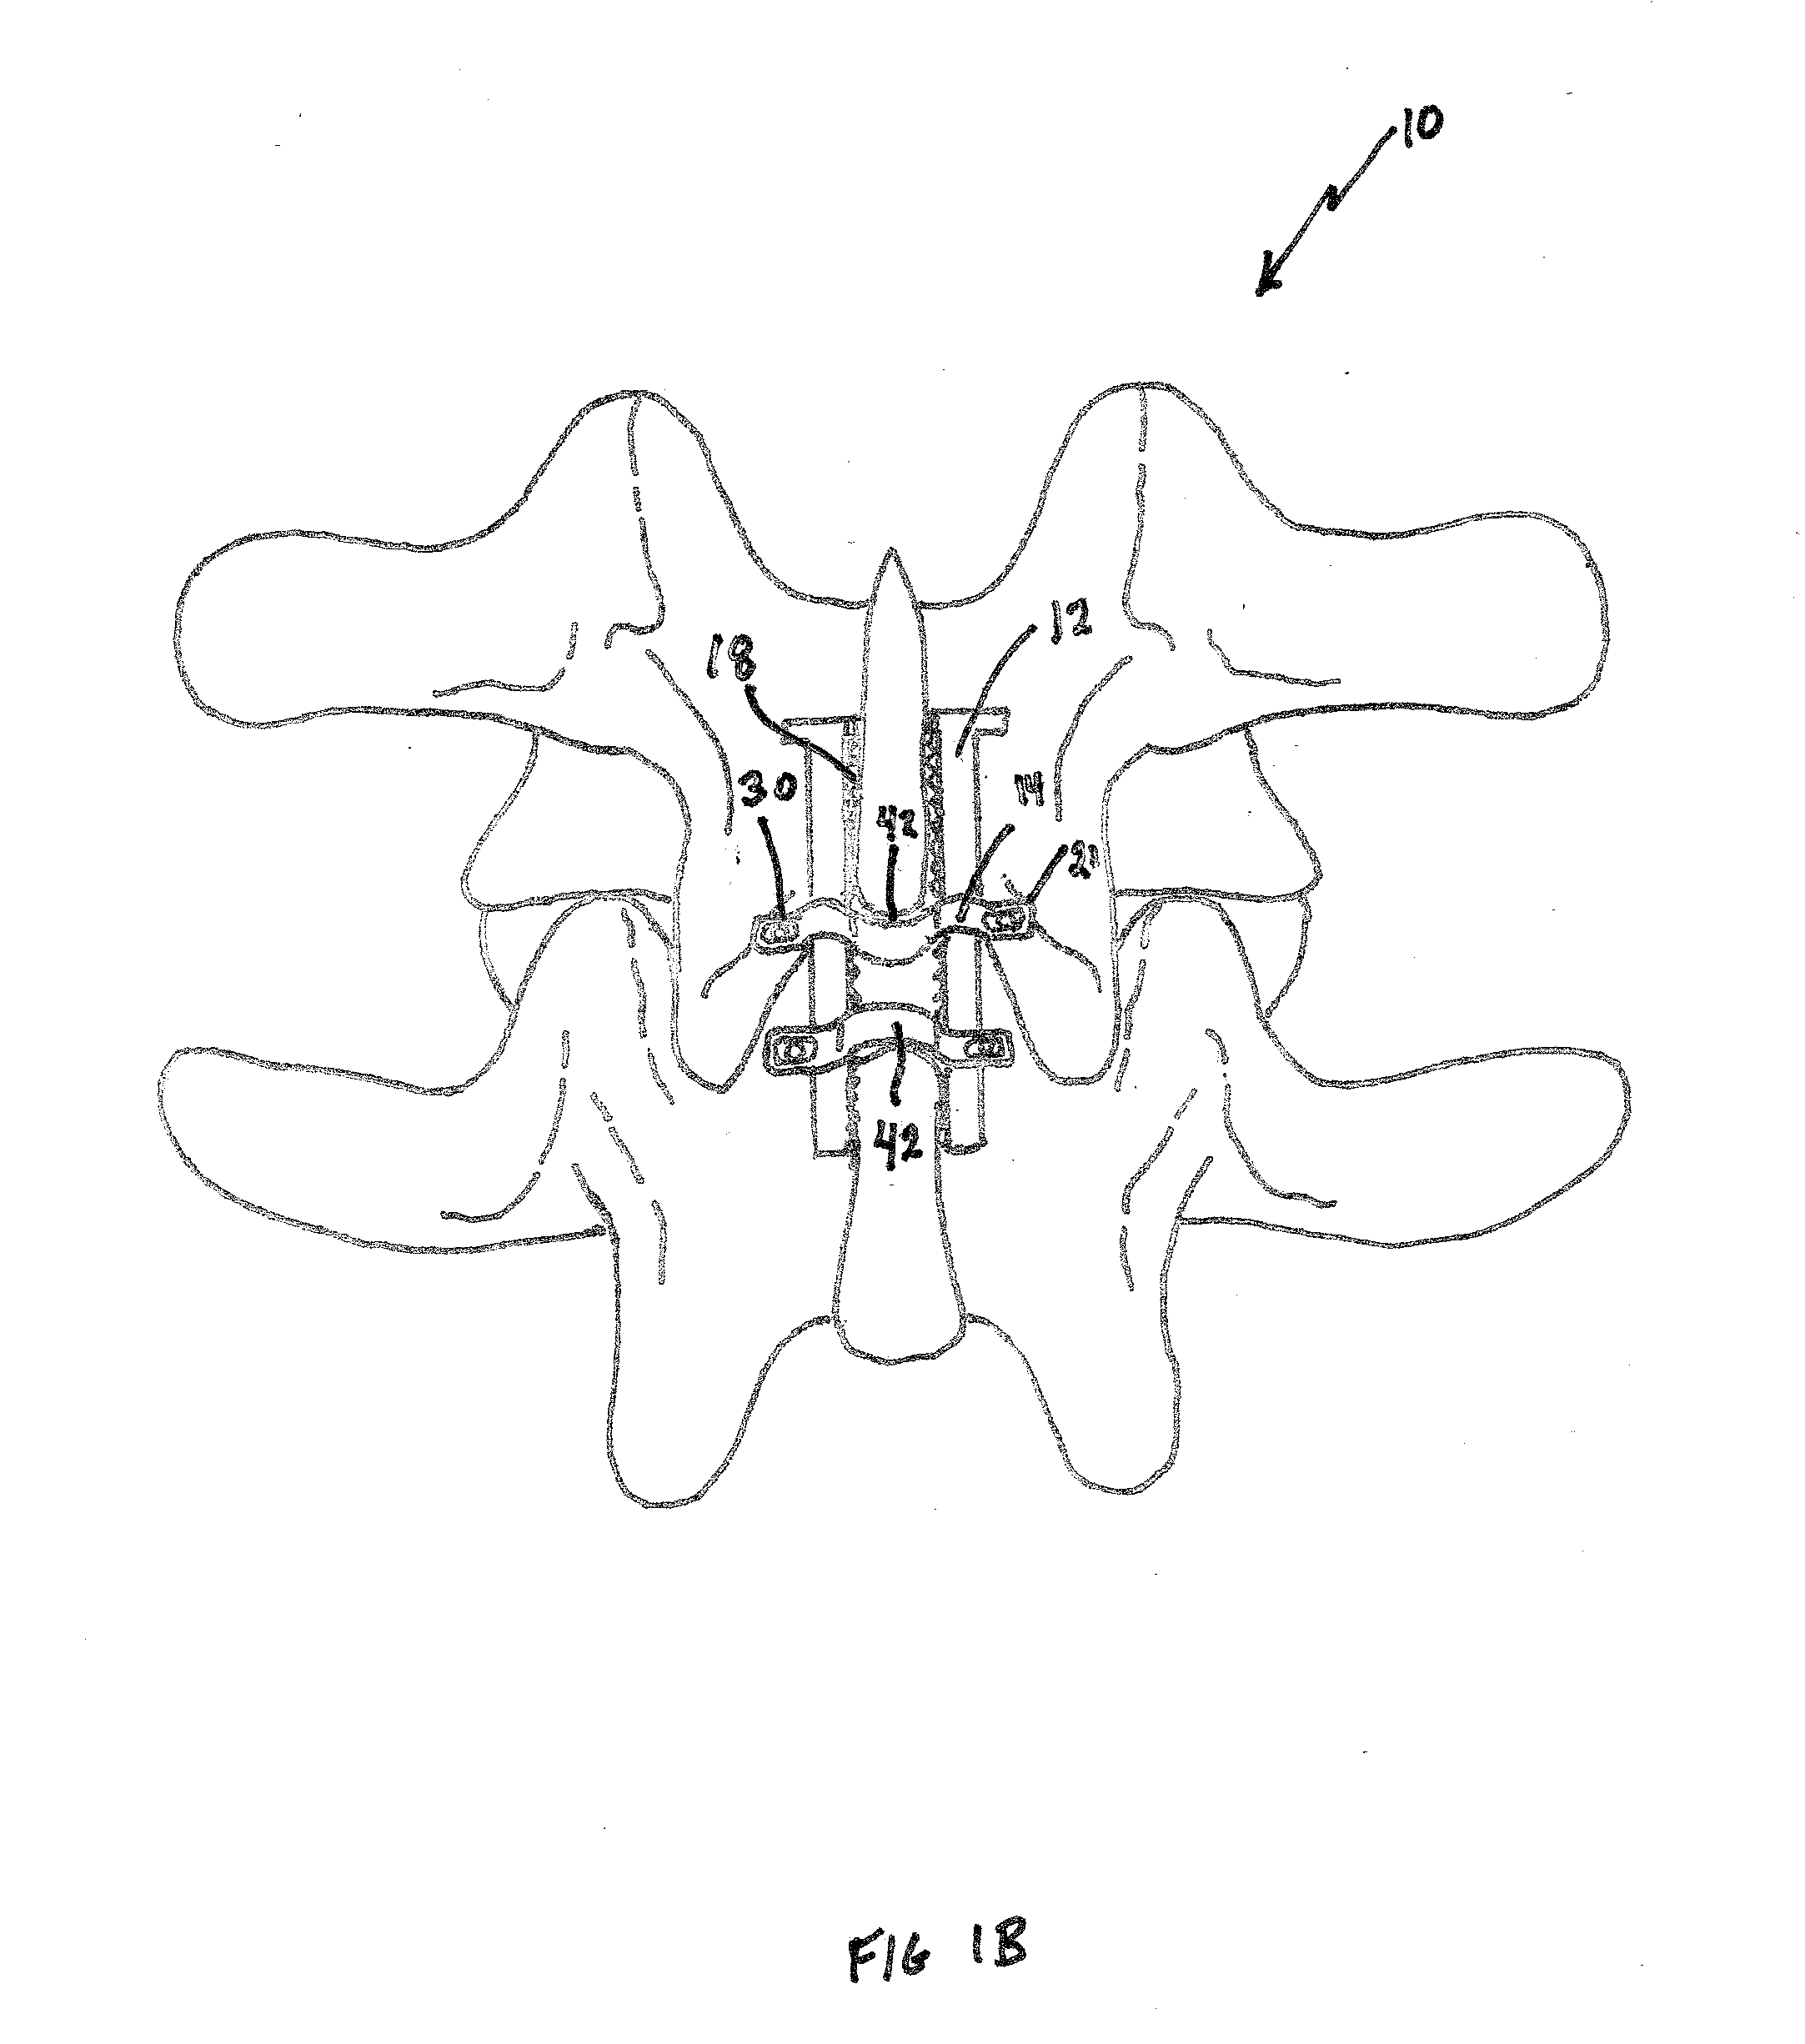 Adjustable spinous process spacer device and method of treating spinal disorders